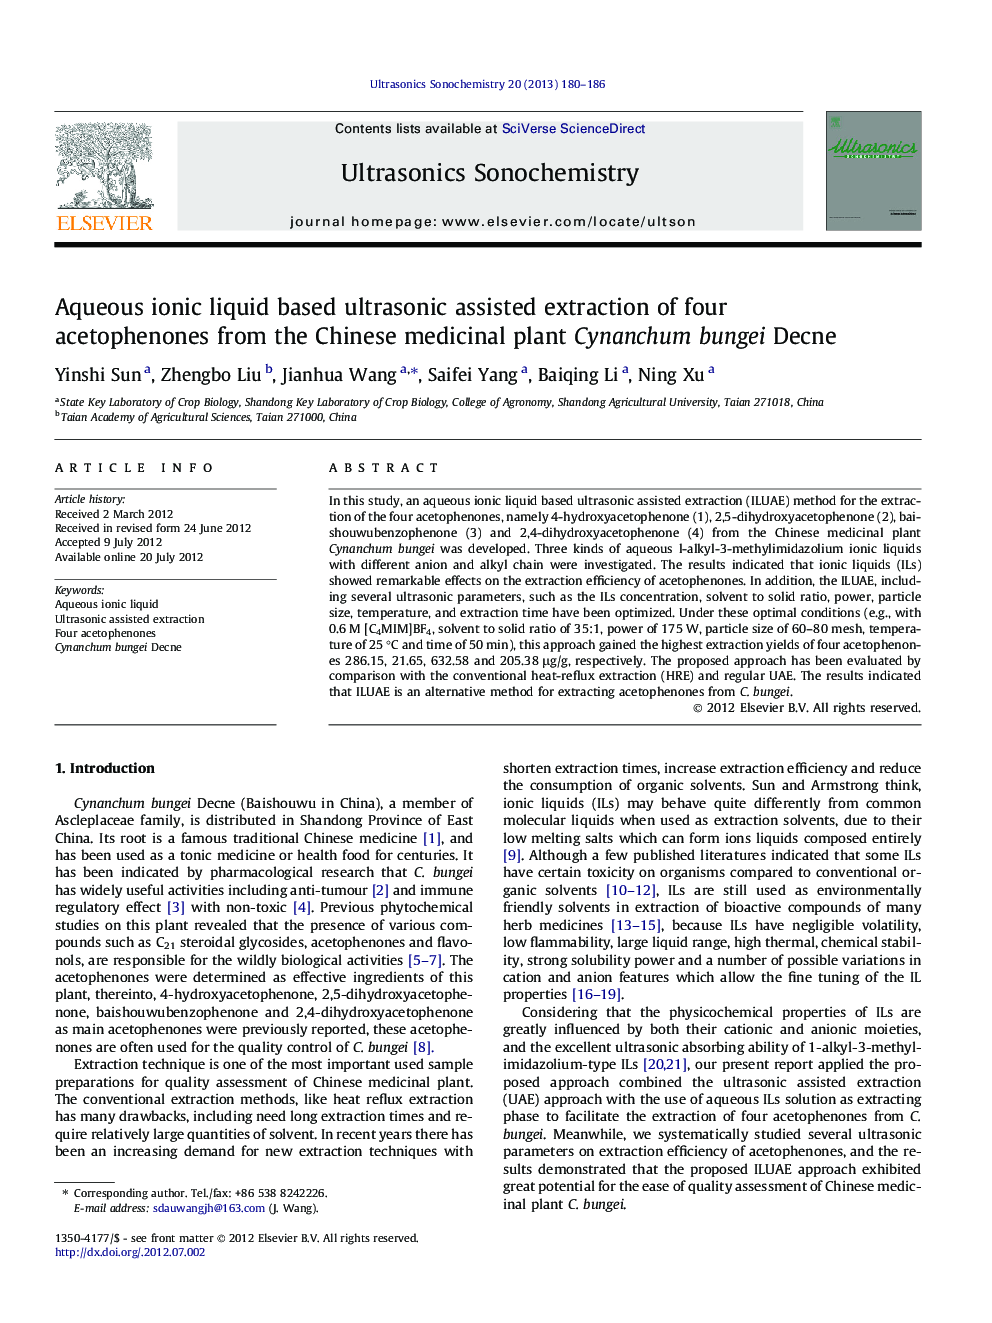 Aqueous ionic liquid based ultrasonic assisted extraction of four acetophenones from the Chinese medicinal plant Cynanchum bungei Decne